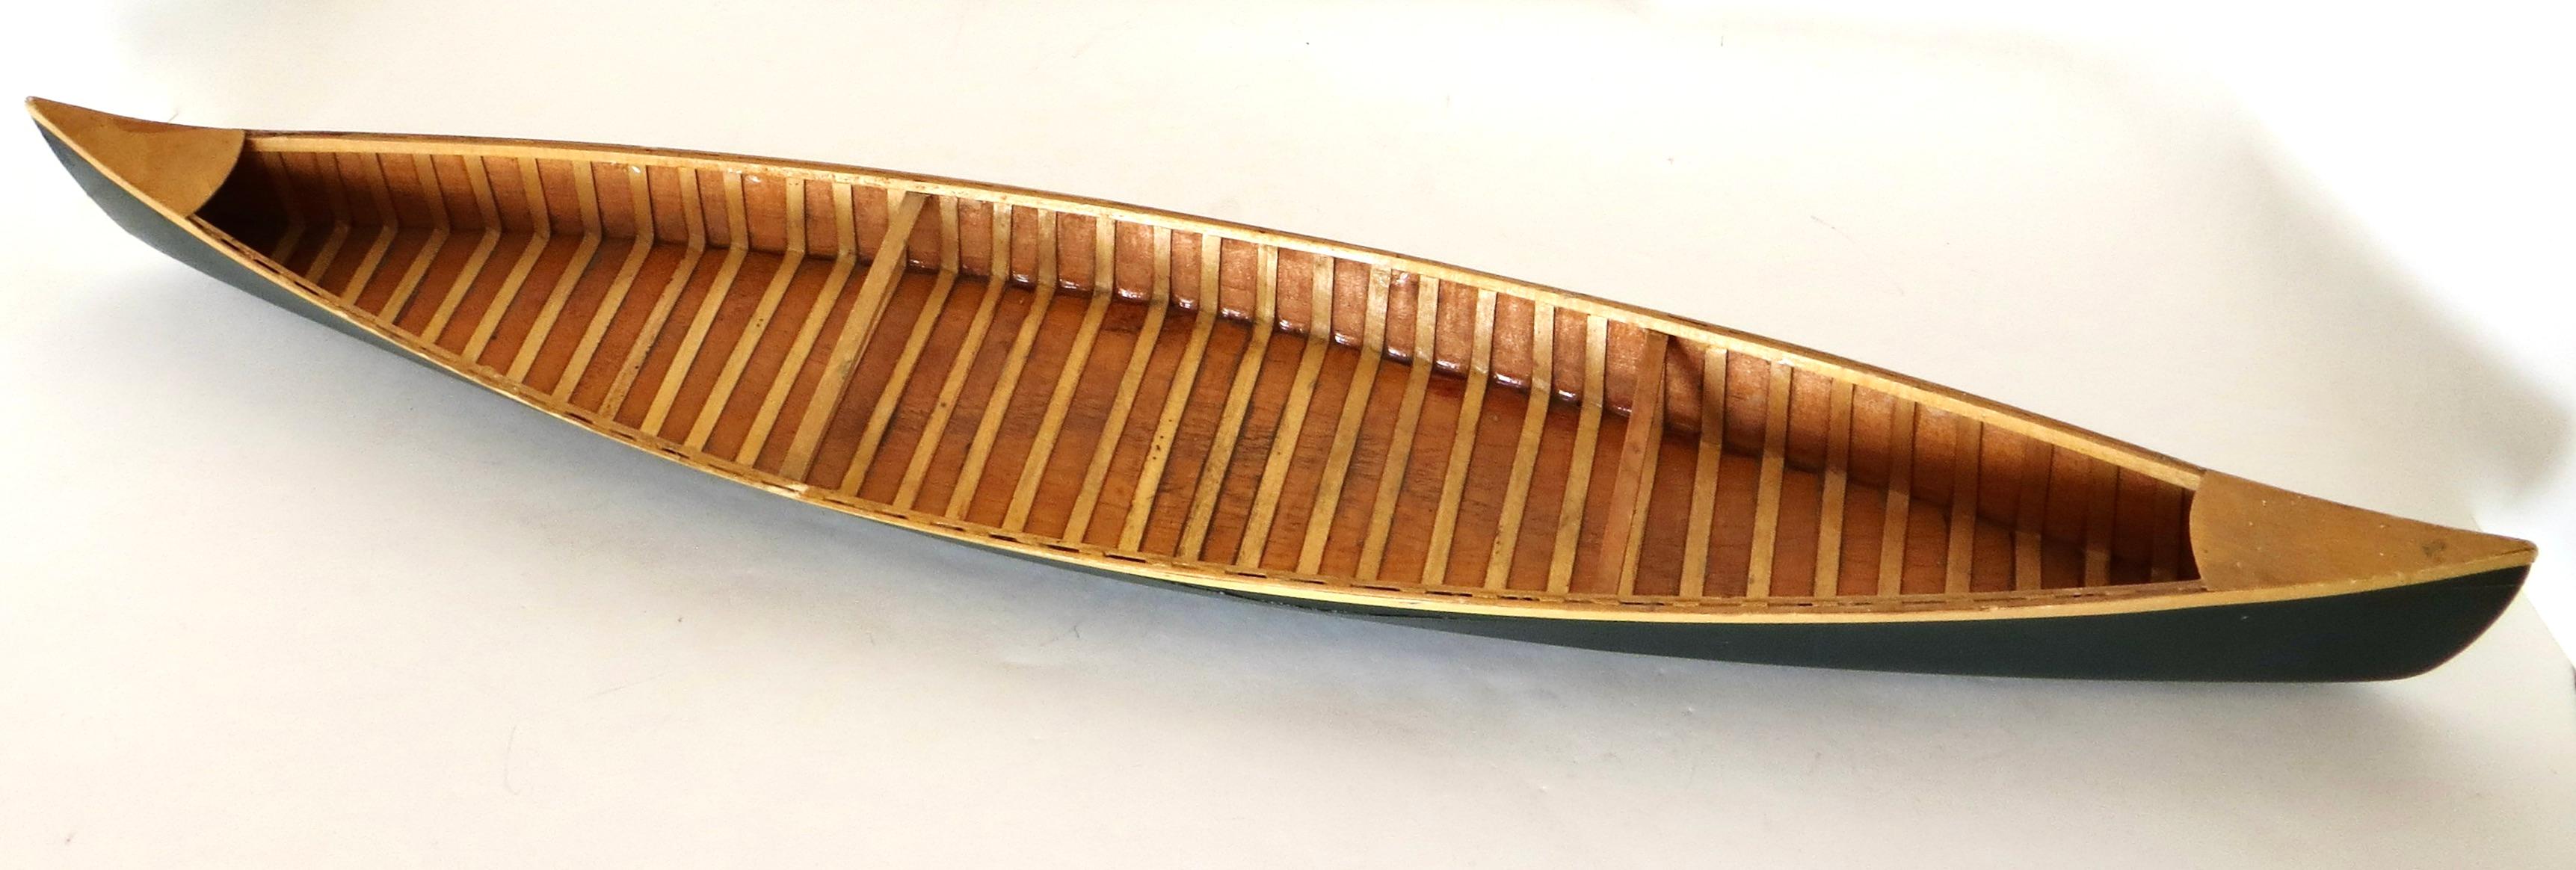 Hand-Crafted Miniature Model Wooden Canoe, American Circa 1950's